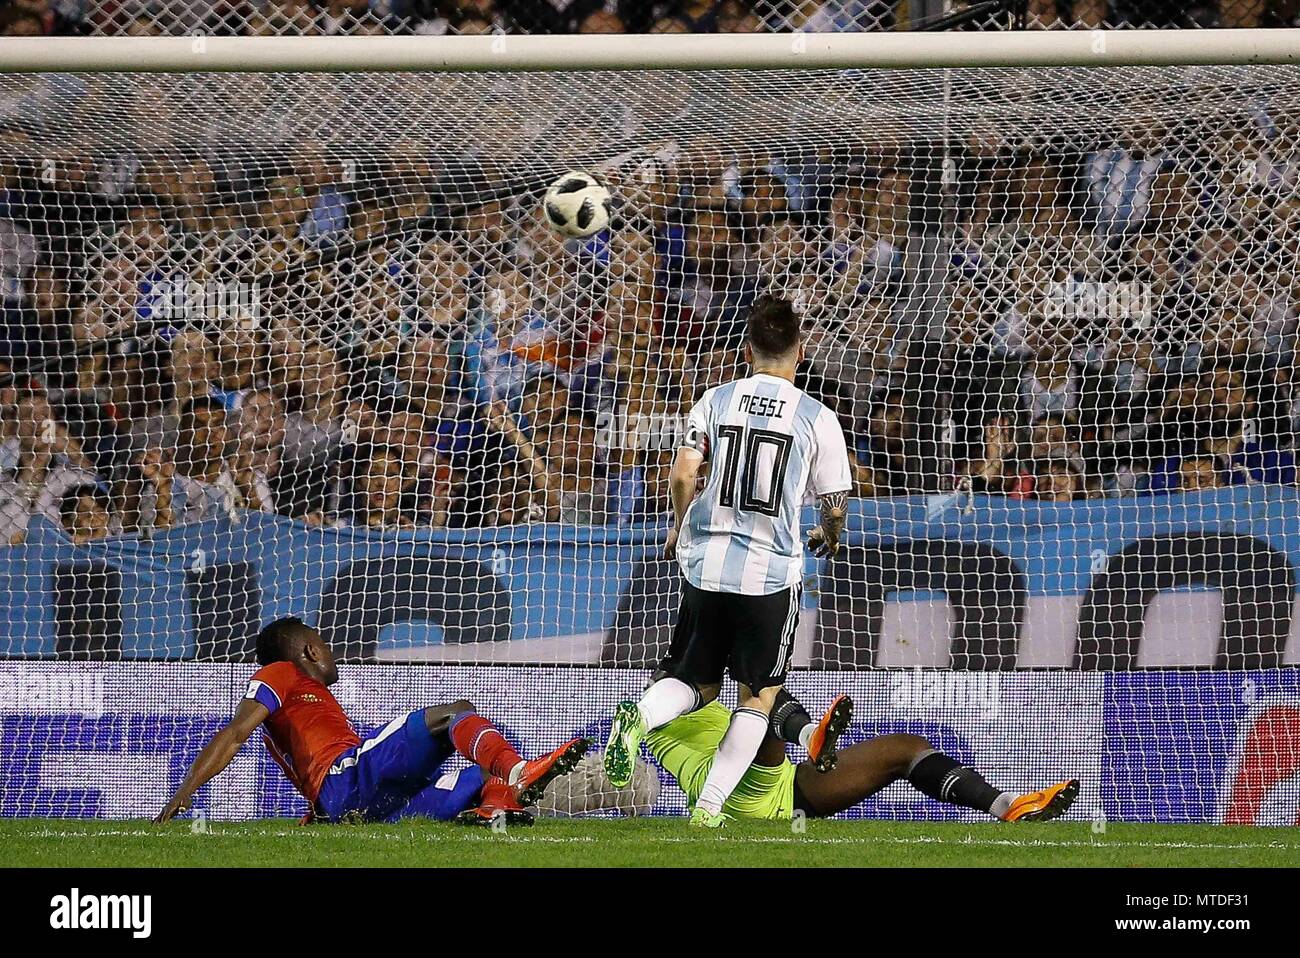 Buenos Aires, Argentina. 29th May, 2018. Argentina&#39ionel Mes Messi scores his third goal in the friy match betwbetween Argentina and Haiti, held at the Alberto José Armando Stadium, known as La Bombonera, located in the La Boca neighborhood in the capital of Buenos Aires. Credit: Marcelo Machado de Melo/FotoArena/Alamy Live News Stock Photo